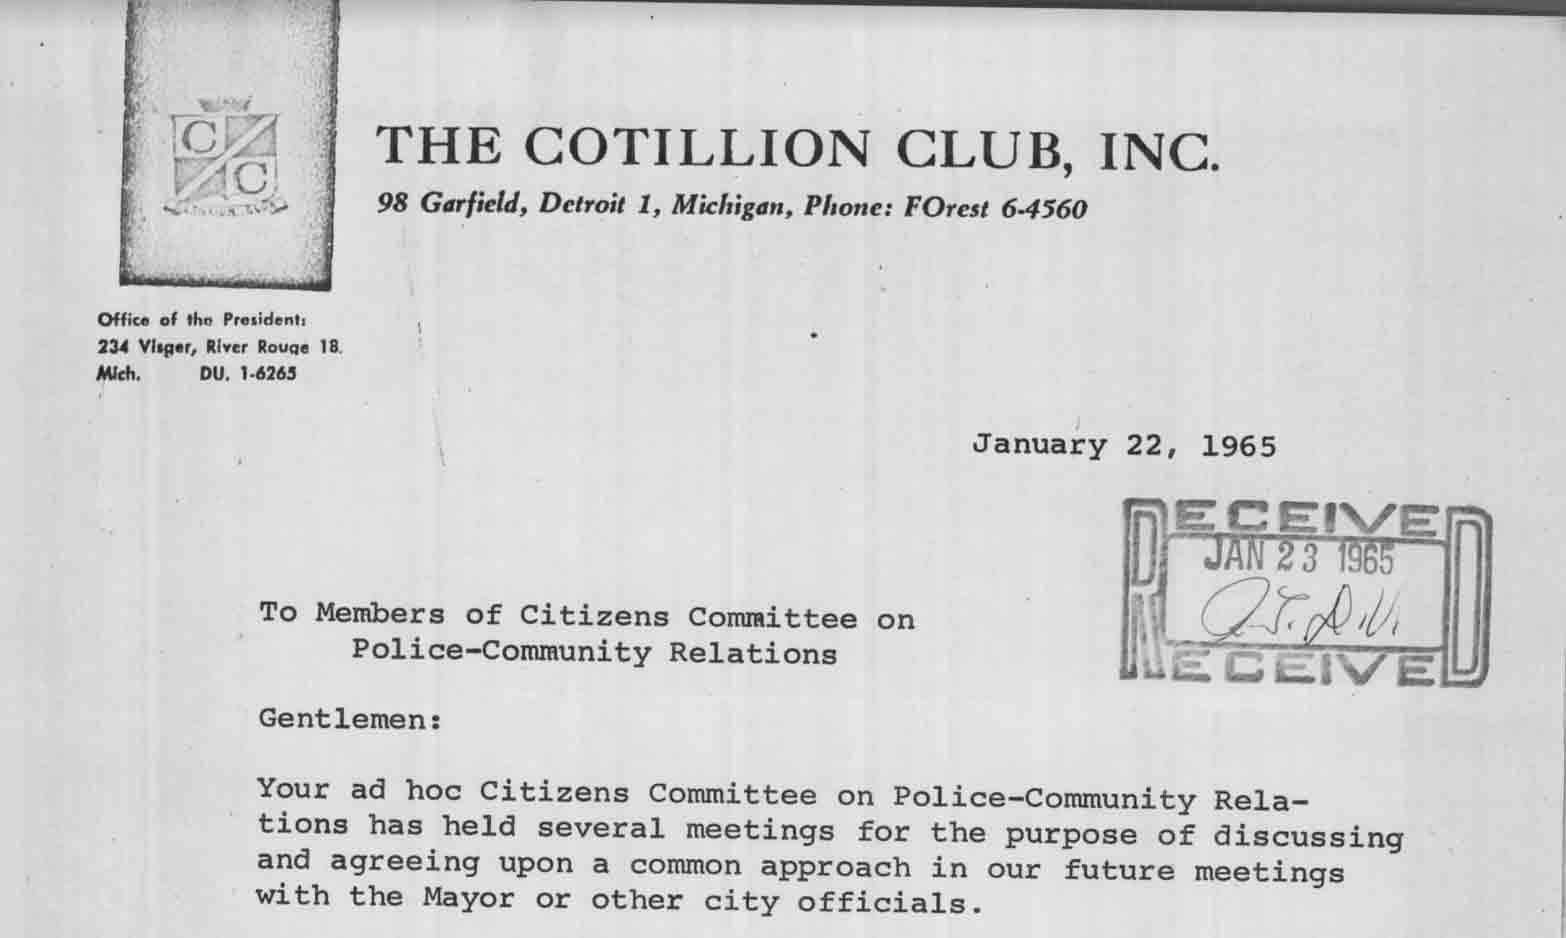 Letter from The Cotillion Club to Members of Citizens Committee on Police-Community Relations